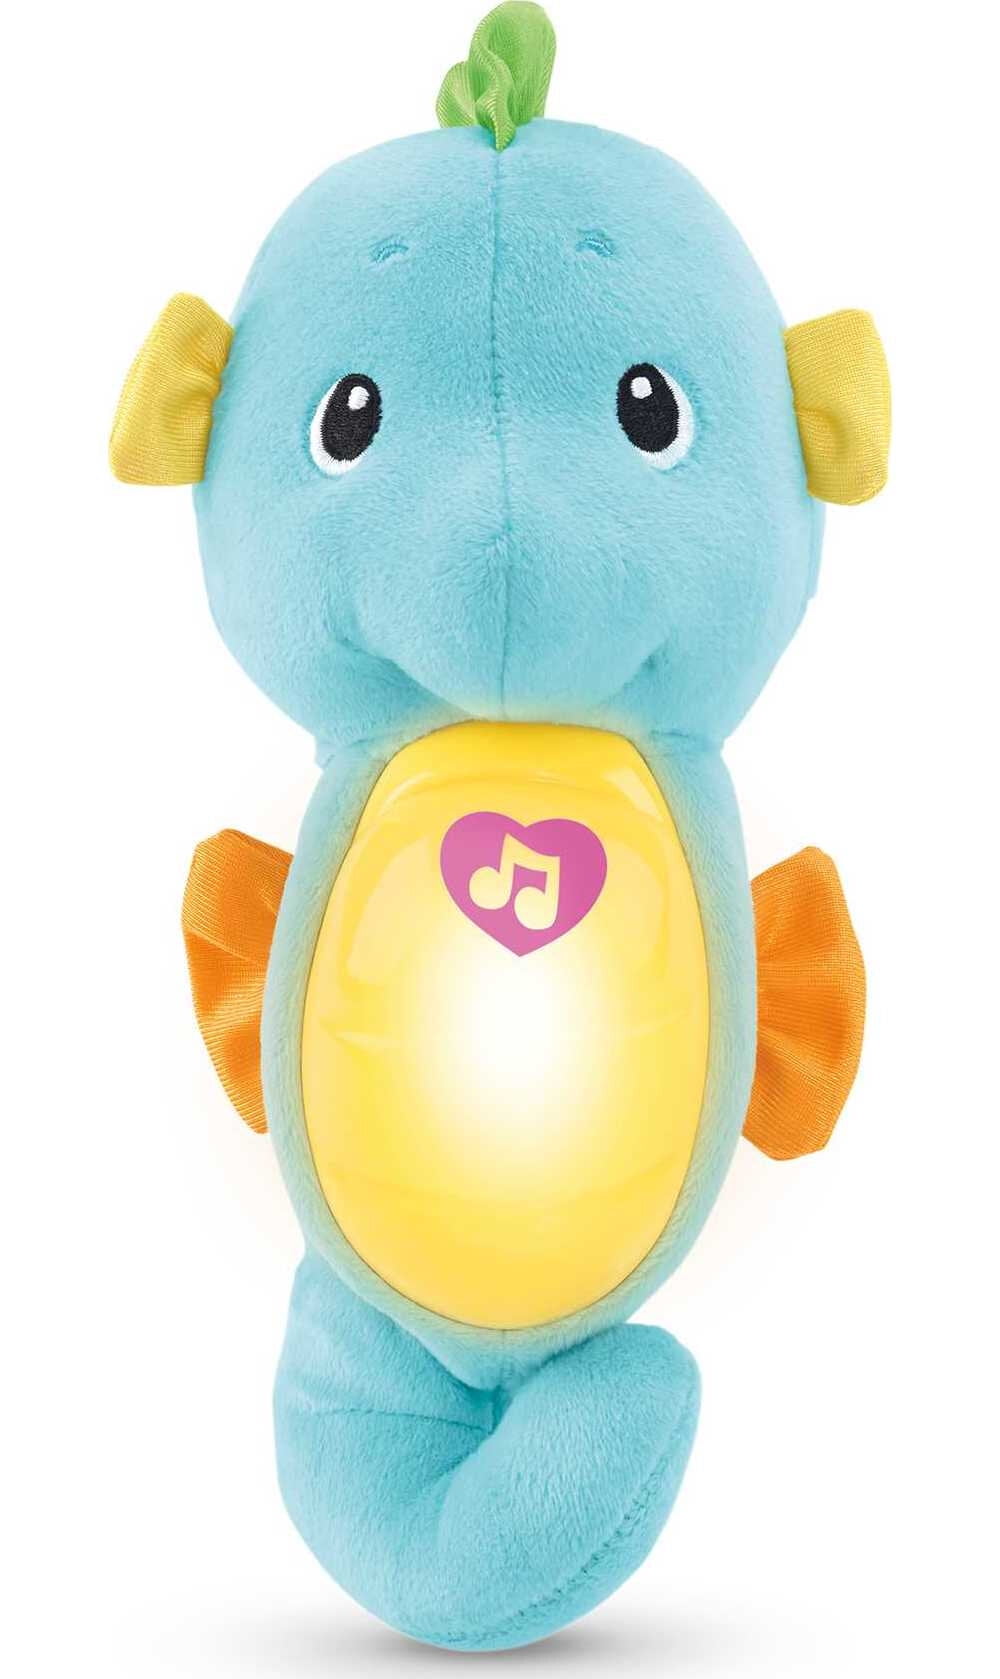 Fisher-Price Soothe & Glow Seahorse, Musical Plush Toy & Sound Machine for Baby with Lights, Blue